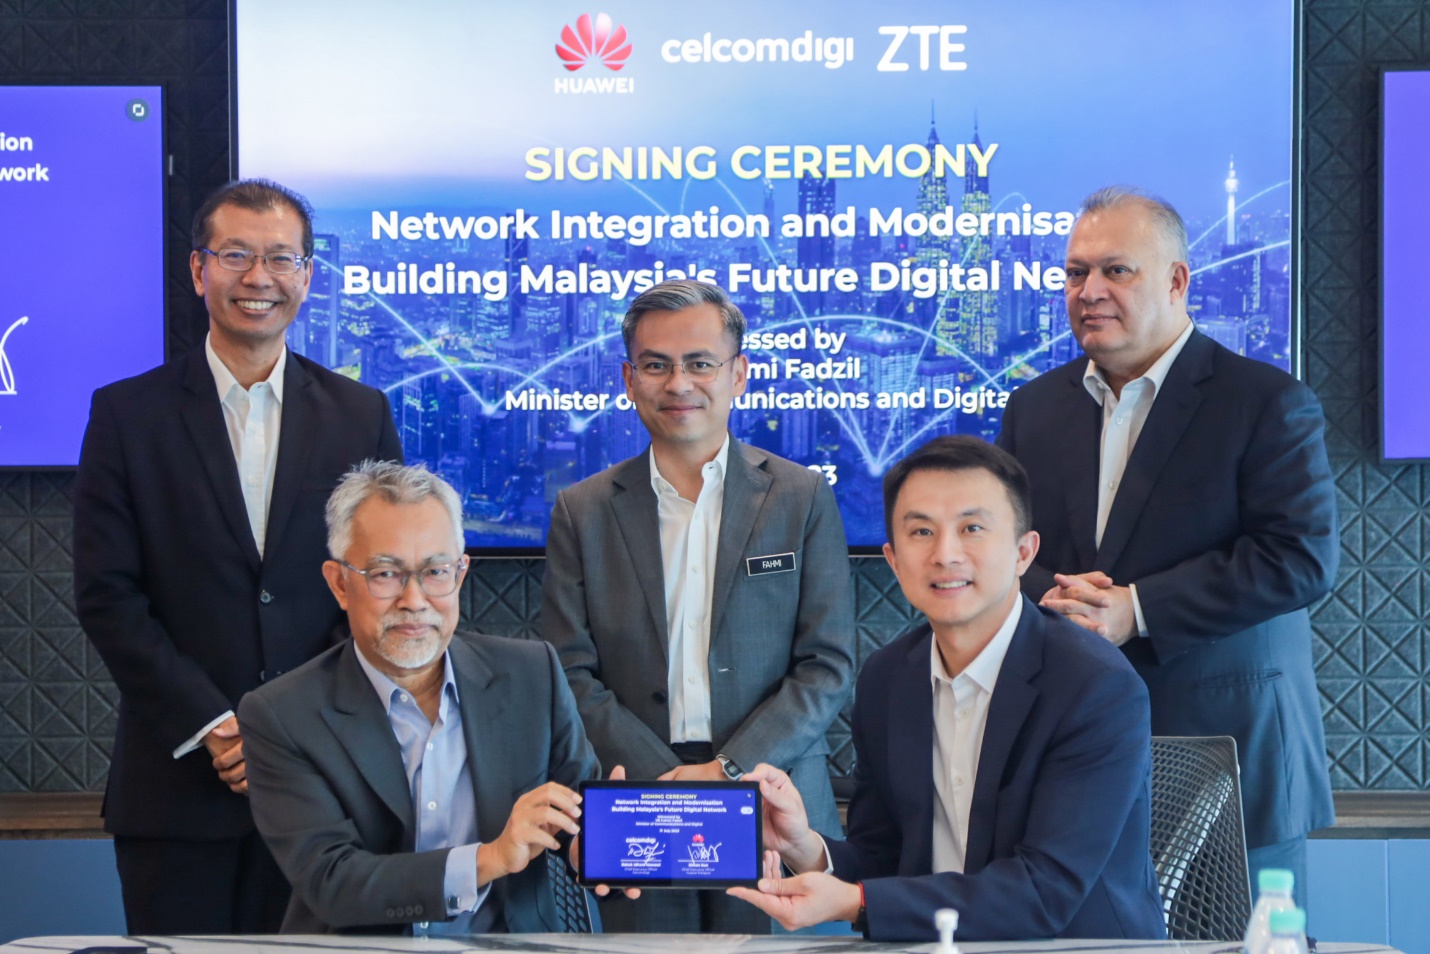 CelcomDigi leadership with Huawei Malaysia's chief executive officer Simon Sun (front, right), Communications and Digital Minister, Fahmi Fadzil (center, back) & MCMC Chairman, Mohamad Salim bin Fateh Din (top, left)